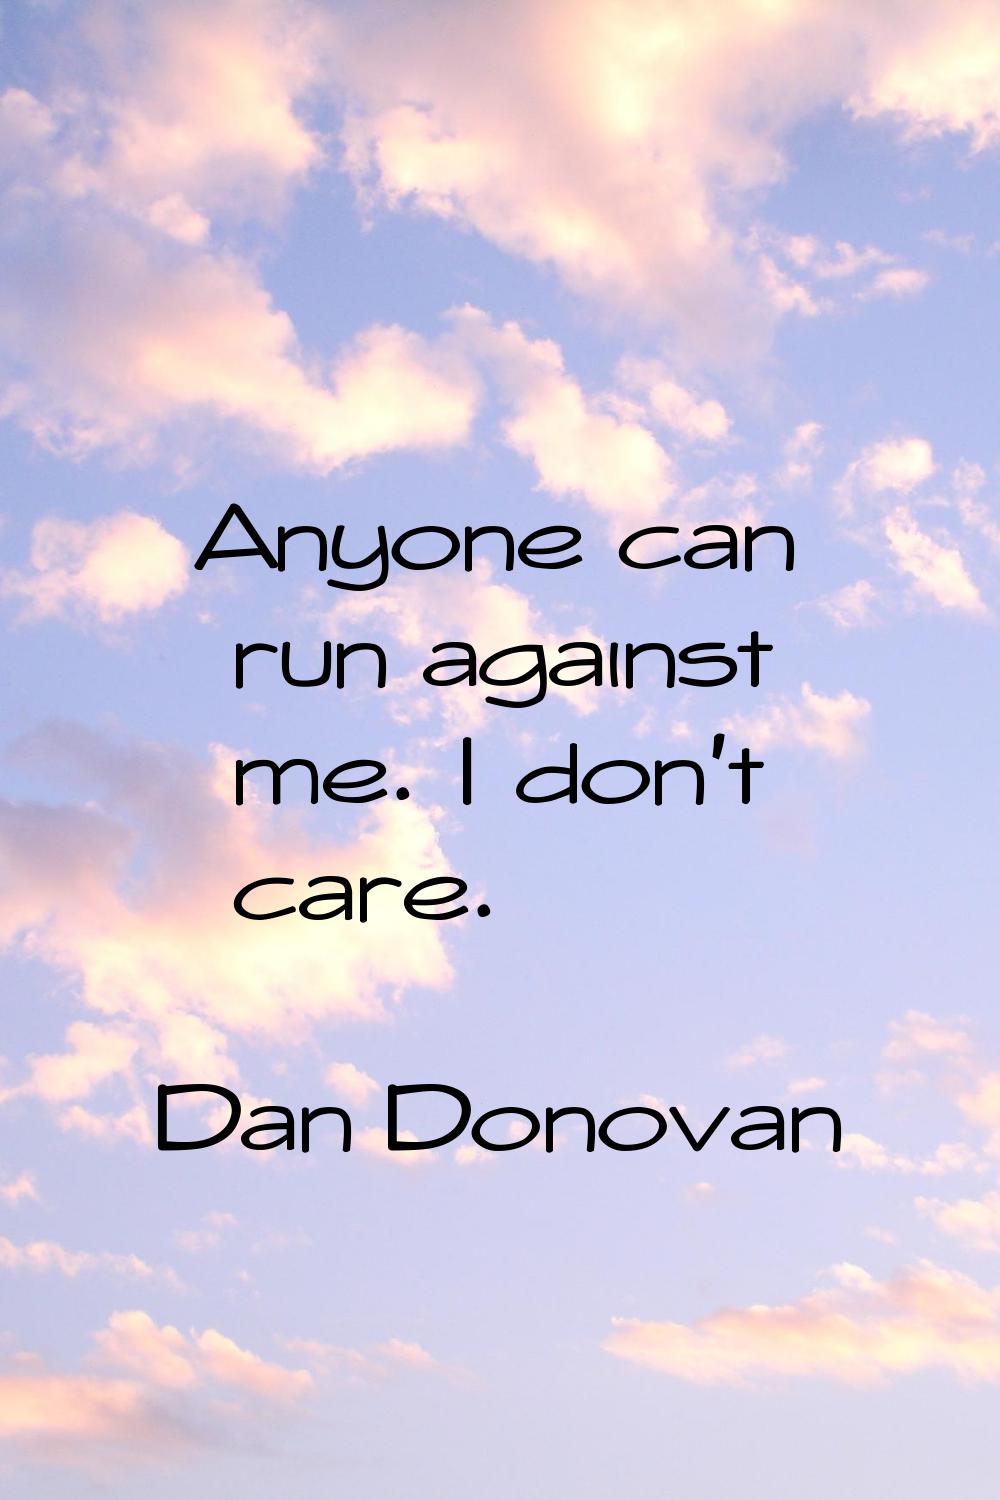 Anyone can run against me. I don't care.